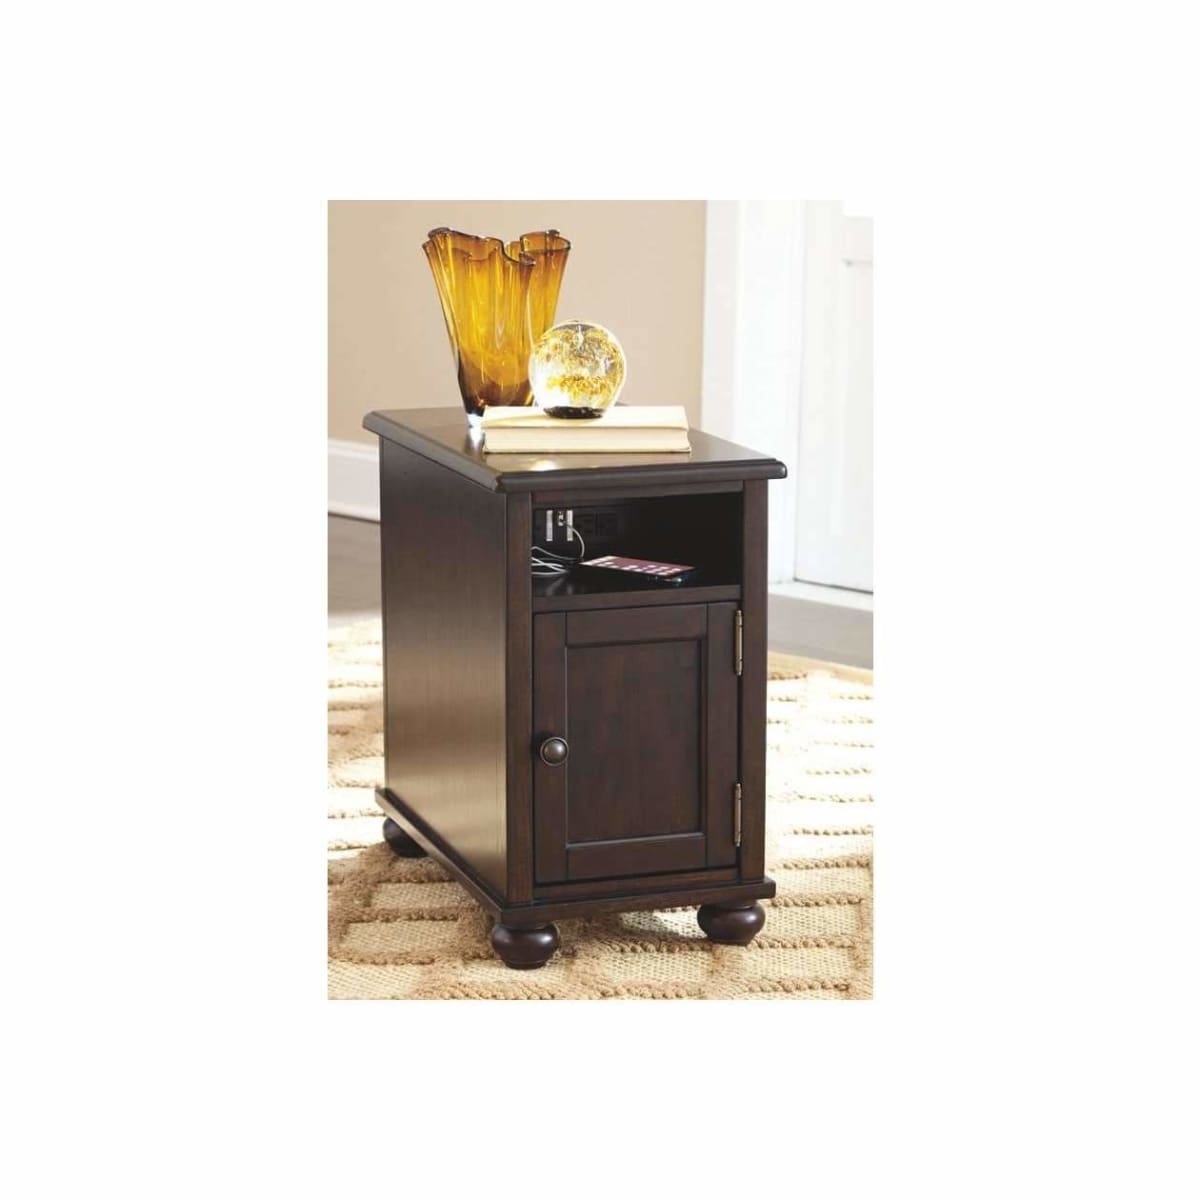 Barilanni Chairside End Table - END TABLE/SIDE TABLE